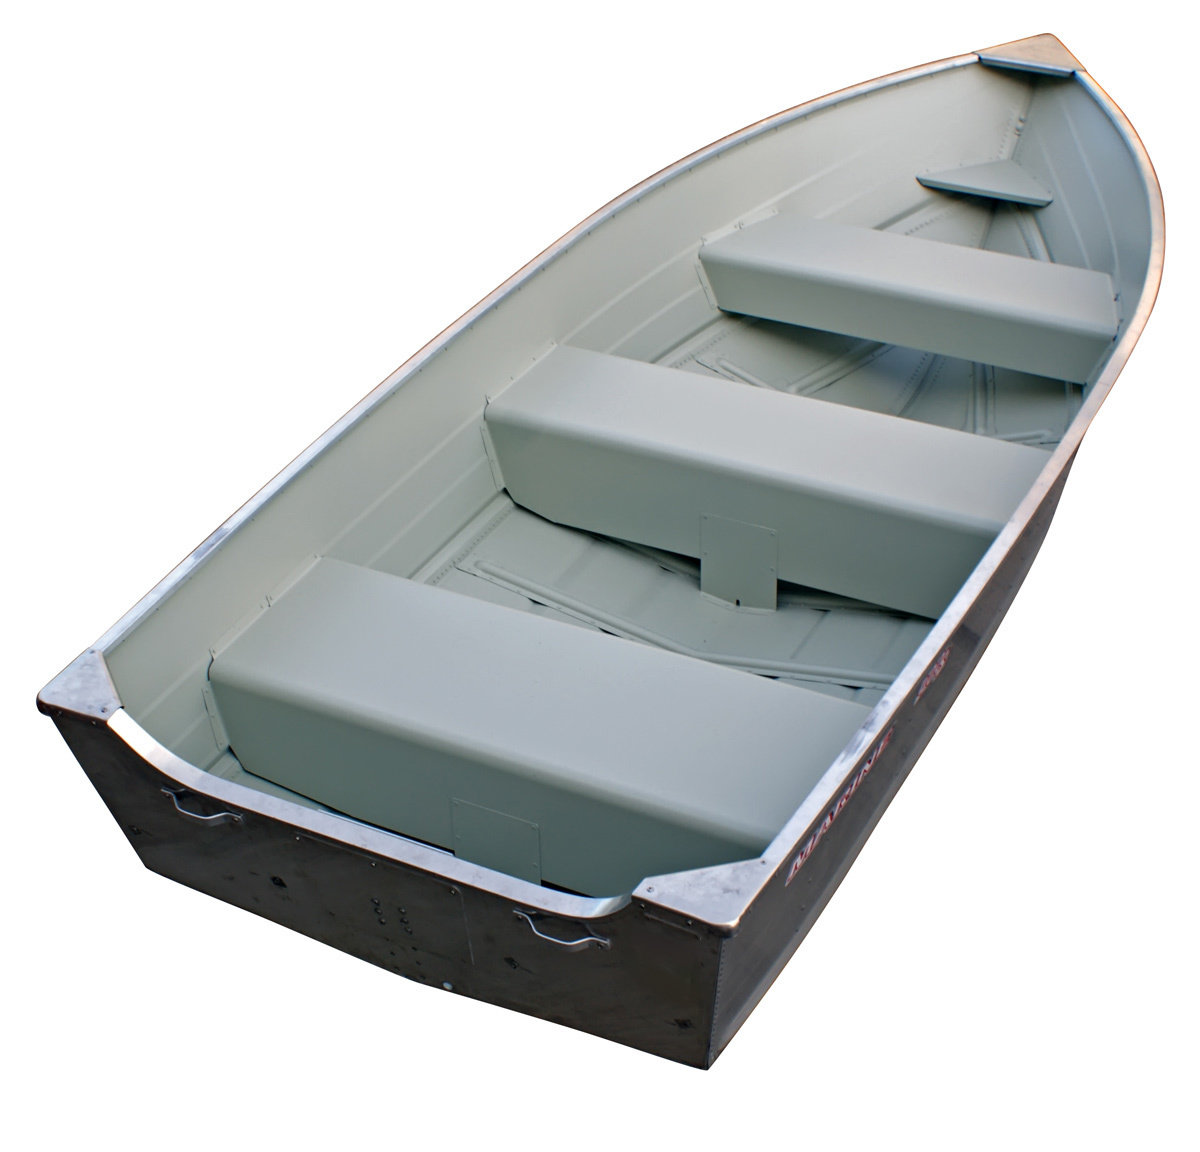 Marine Aluminium 400 S: V Hull Ally Boat ~ Dinghy ~ Fishing ~ Sea CLICK FOR FURTHER PRICING